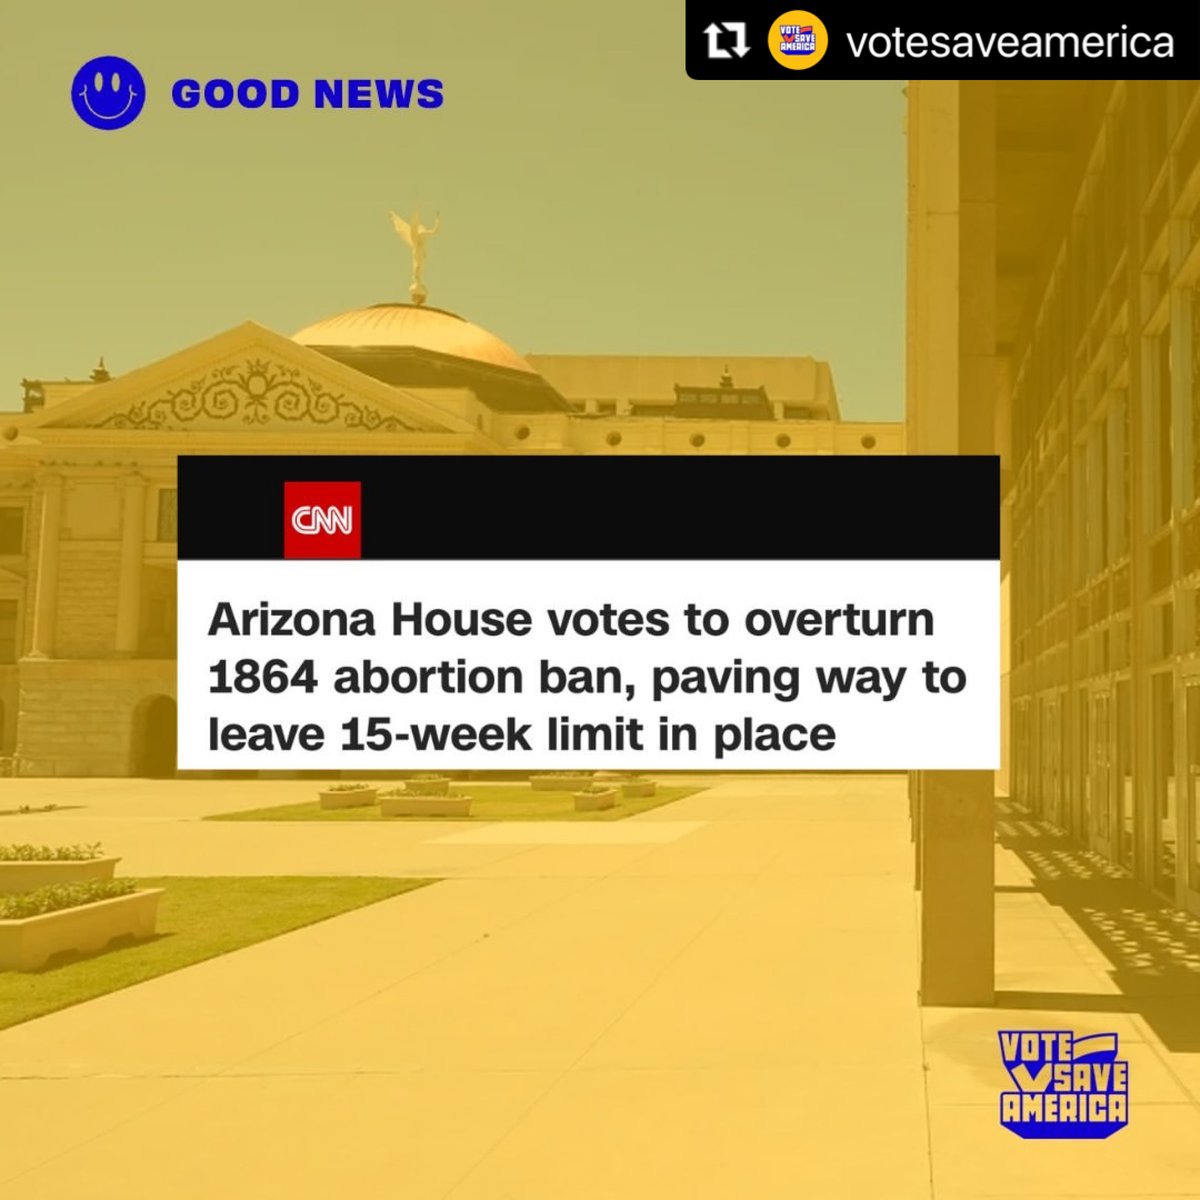 The current news may be quite disheartening, but here's some good news 🌞

Repost from @votesaveamerica